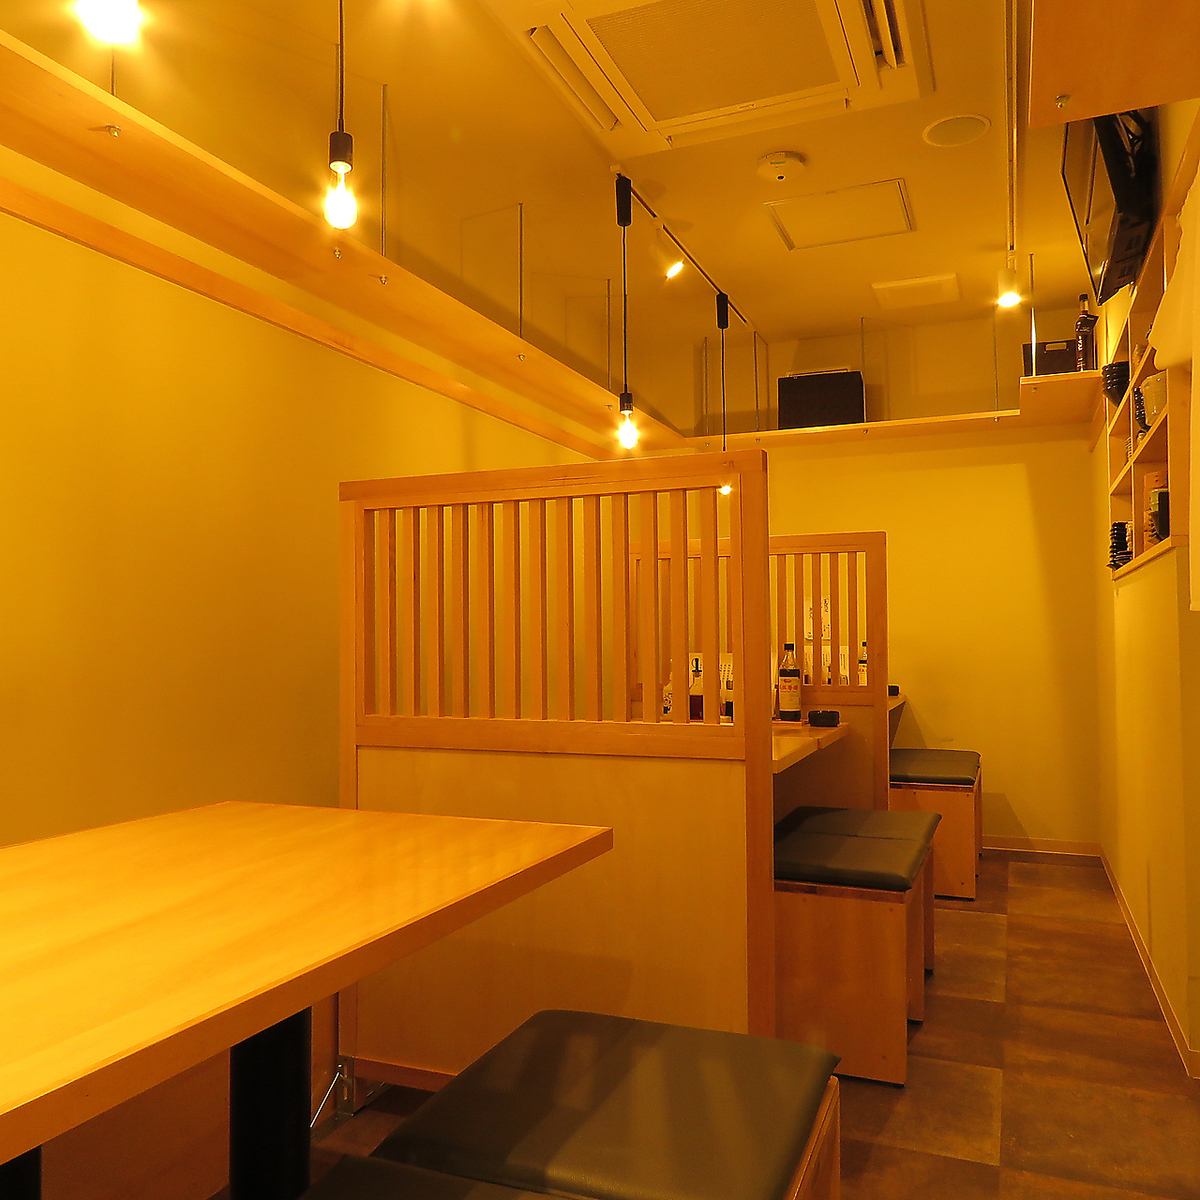 Newly opened in the middle of Yagenbori! Enjoy exquisite cuisine and delicious sake